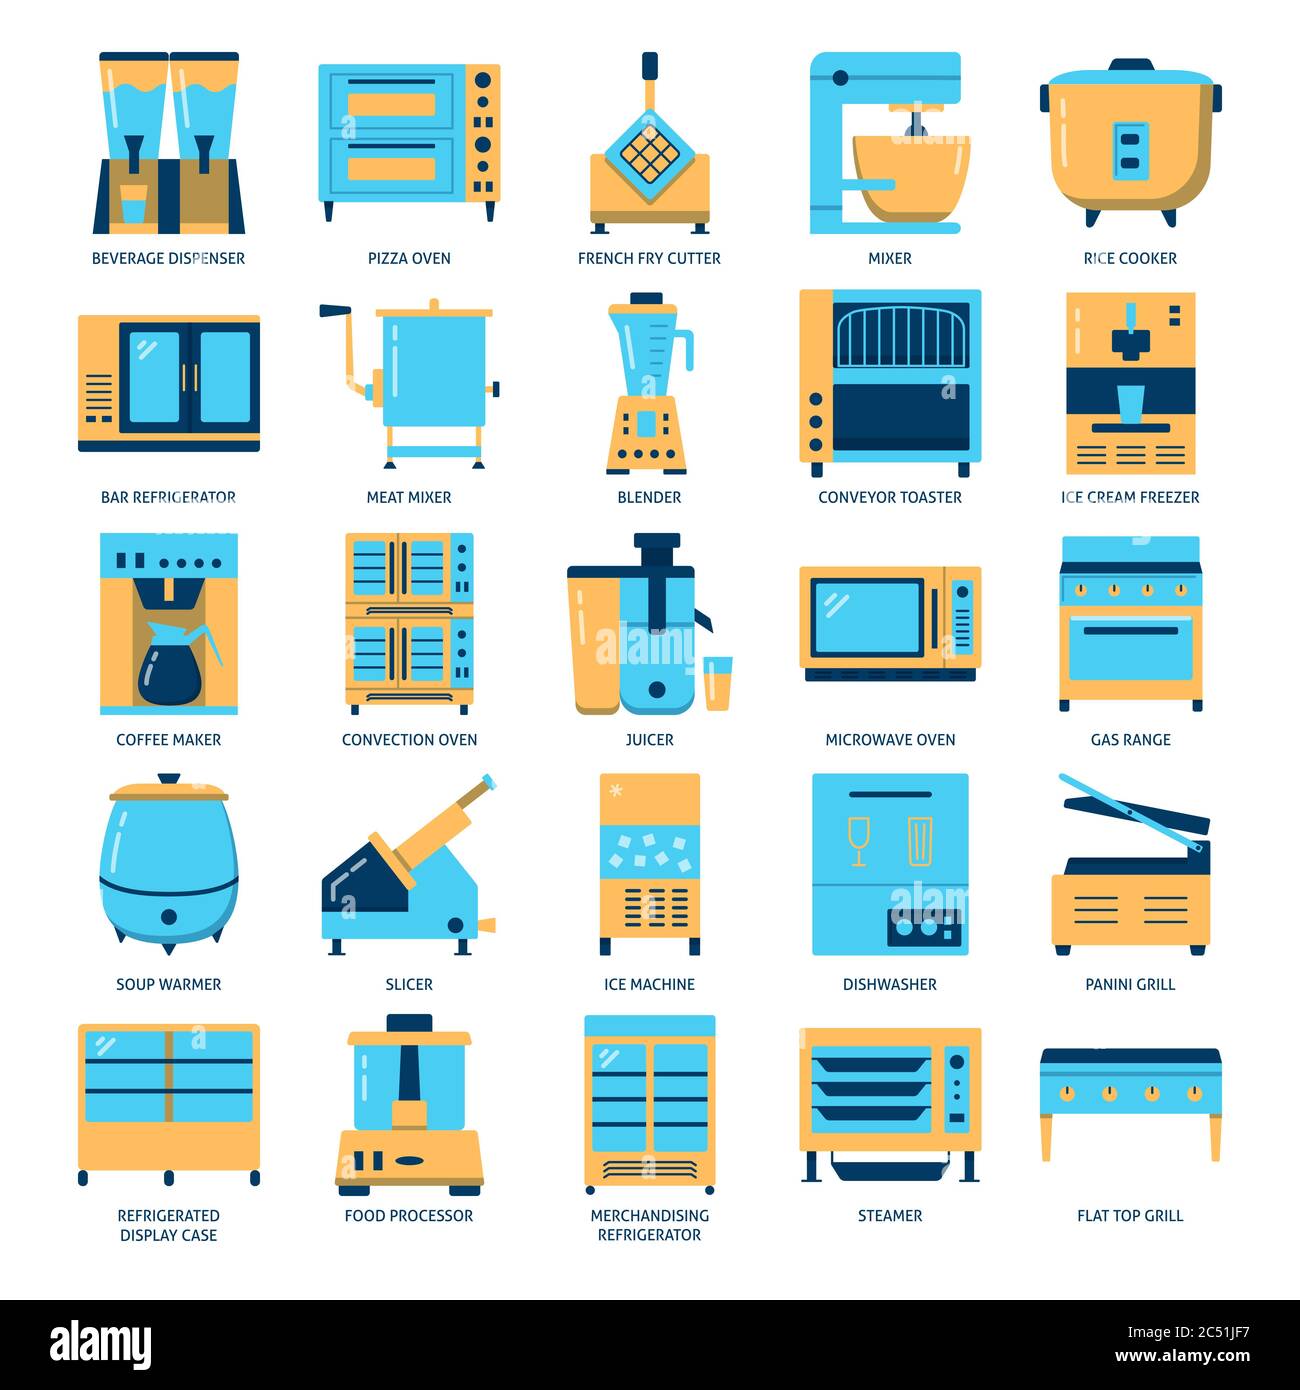 https://c8.alamy.com/comp/2C51JF7/restaurant-kitchen-equipment-icon-set-in-flat-style-commercial-cooking-appliances-symbols-collection-vector-illustration-2C51JF7.jpg